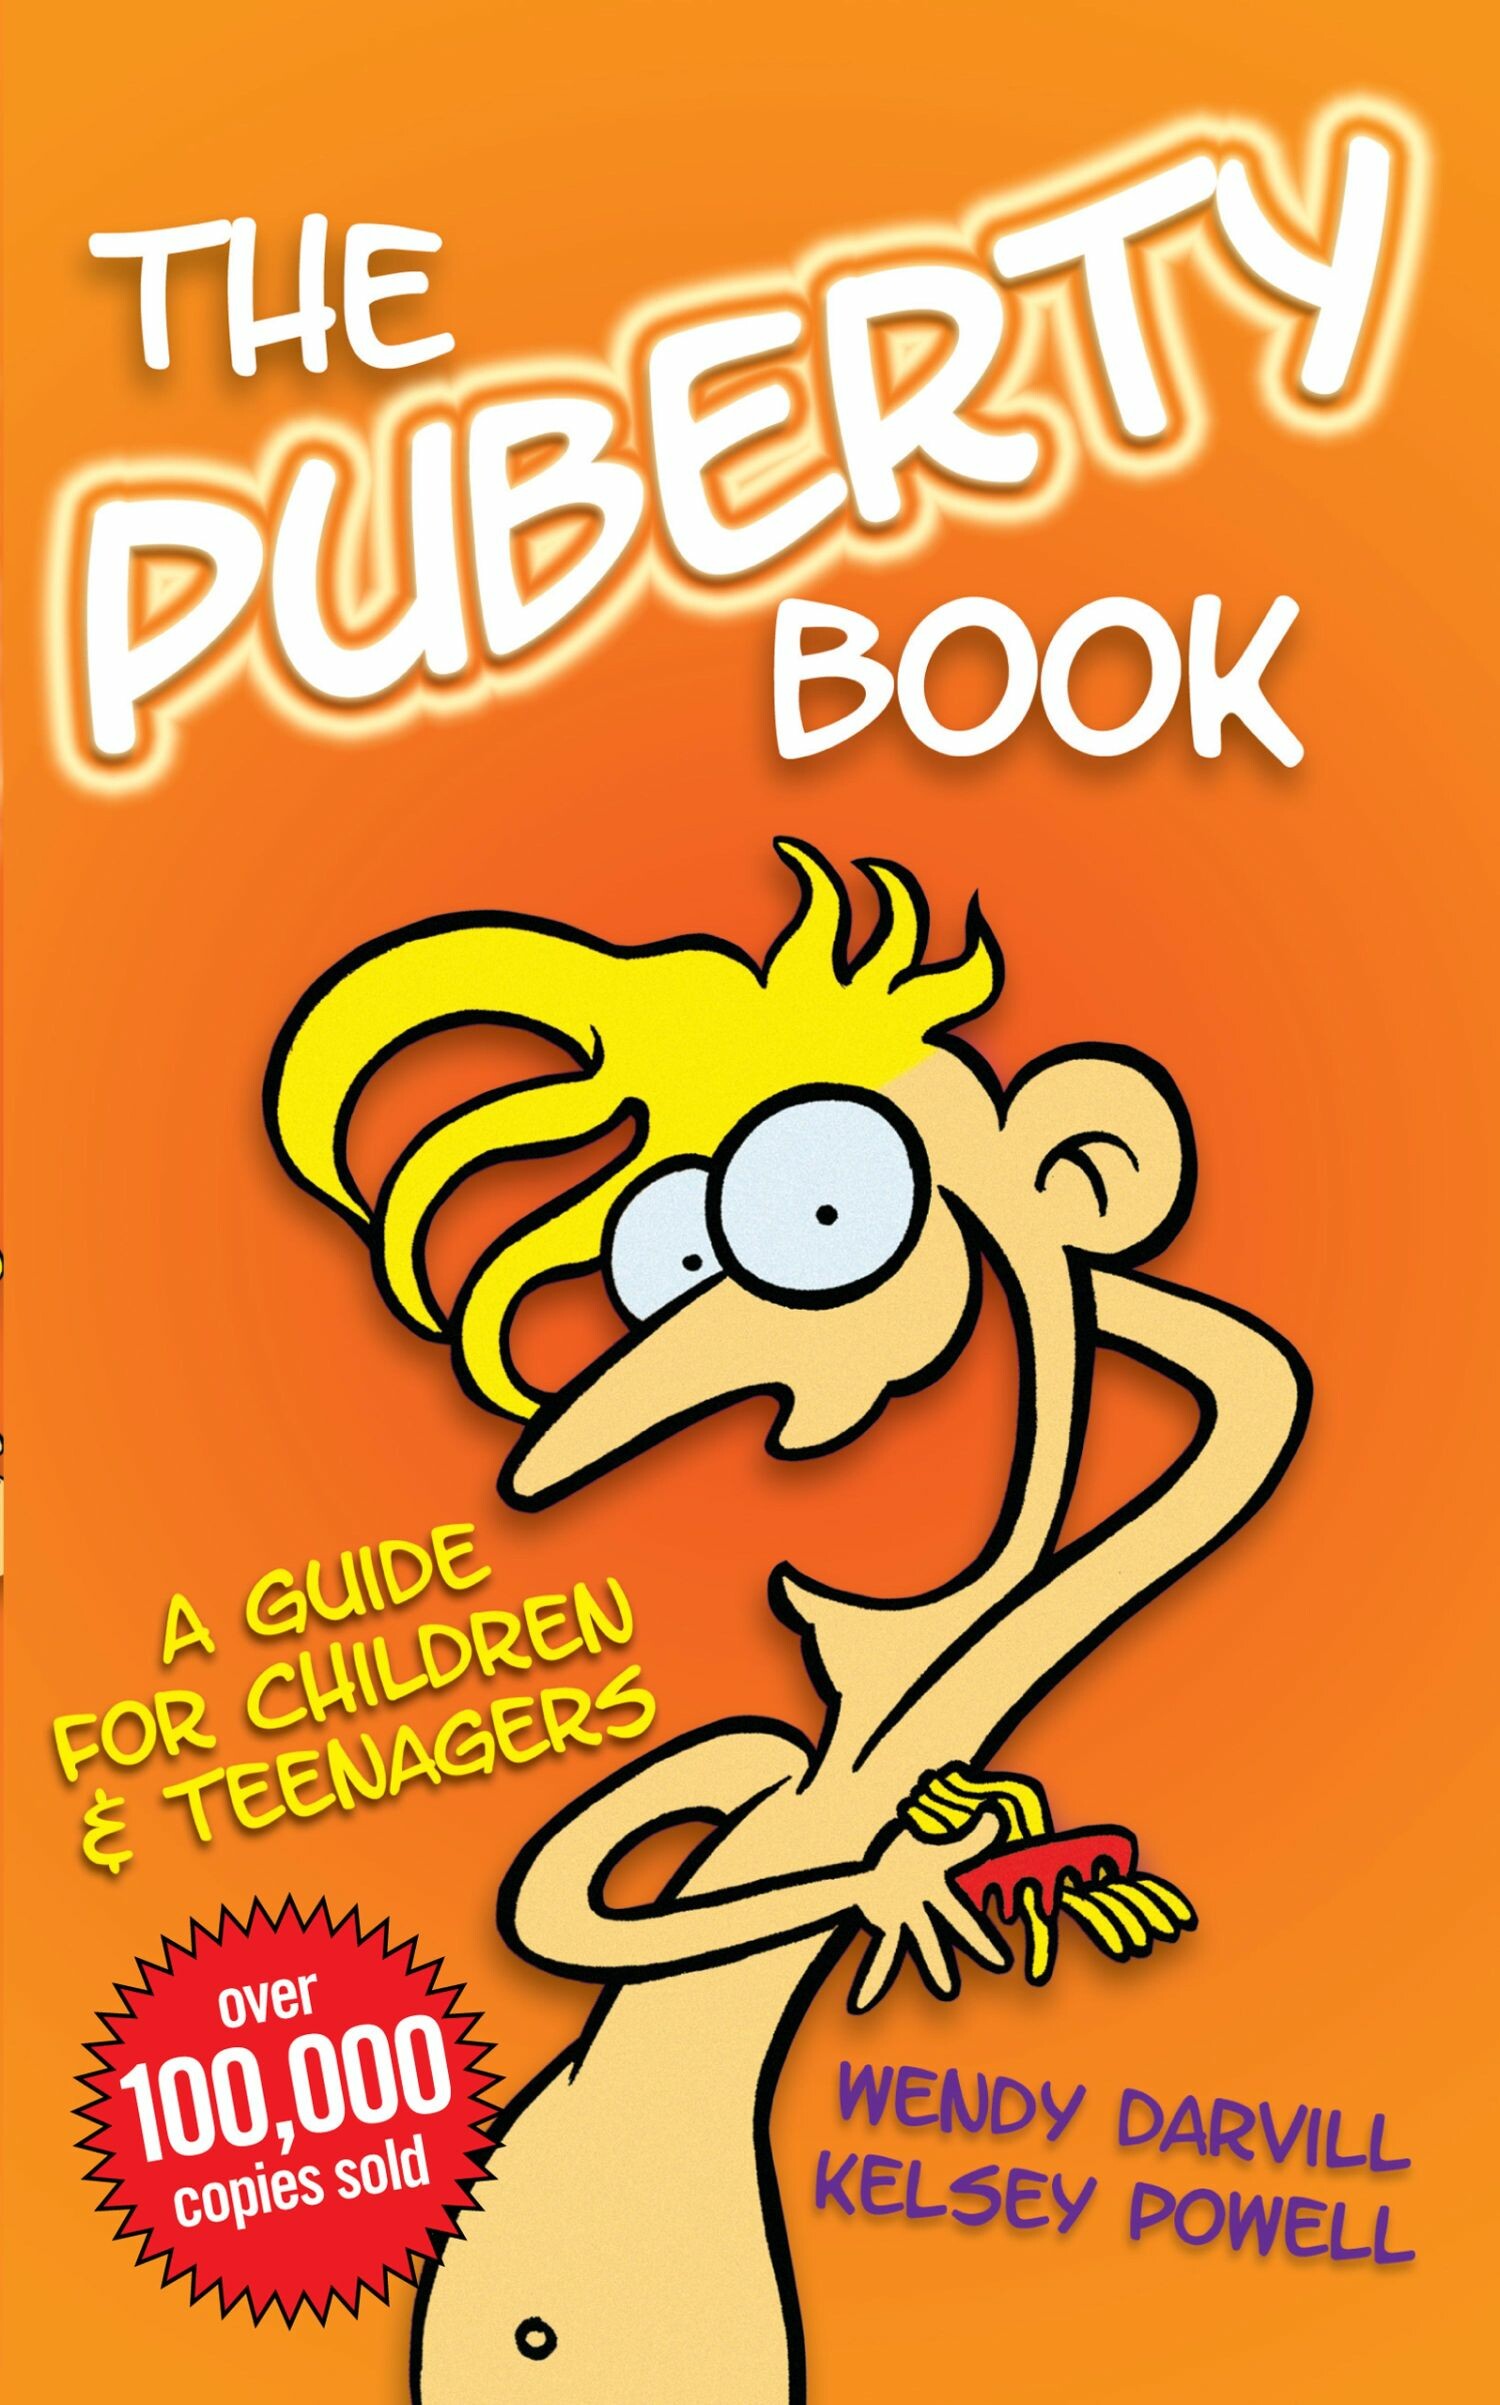 The Puberty Book - The Bestselling Guide for Children and Teenagers